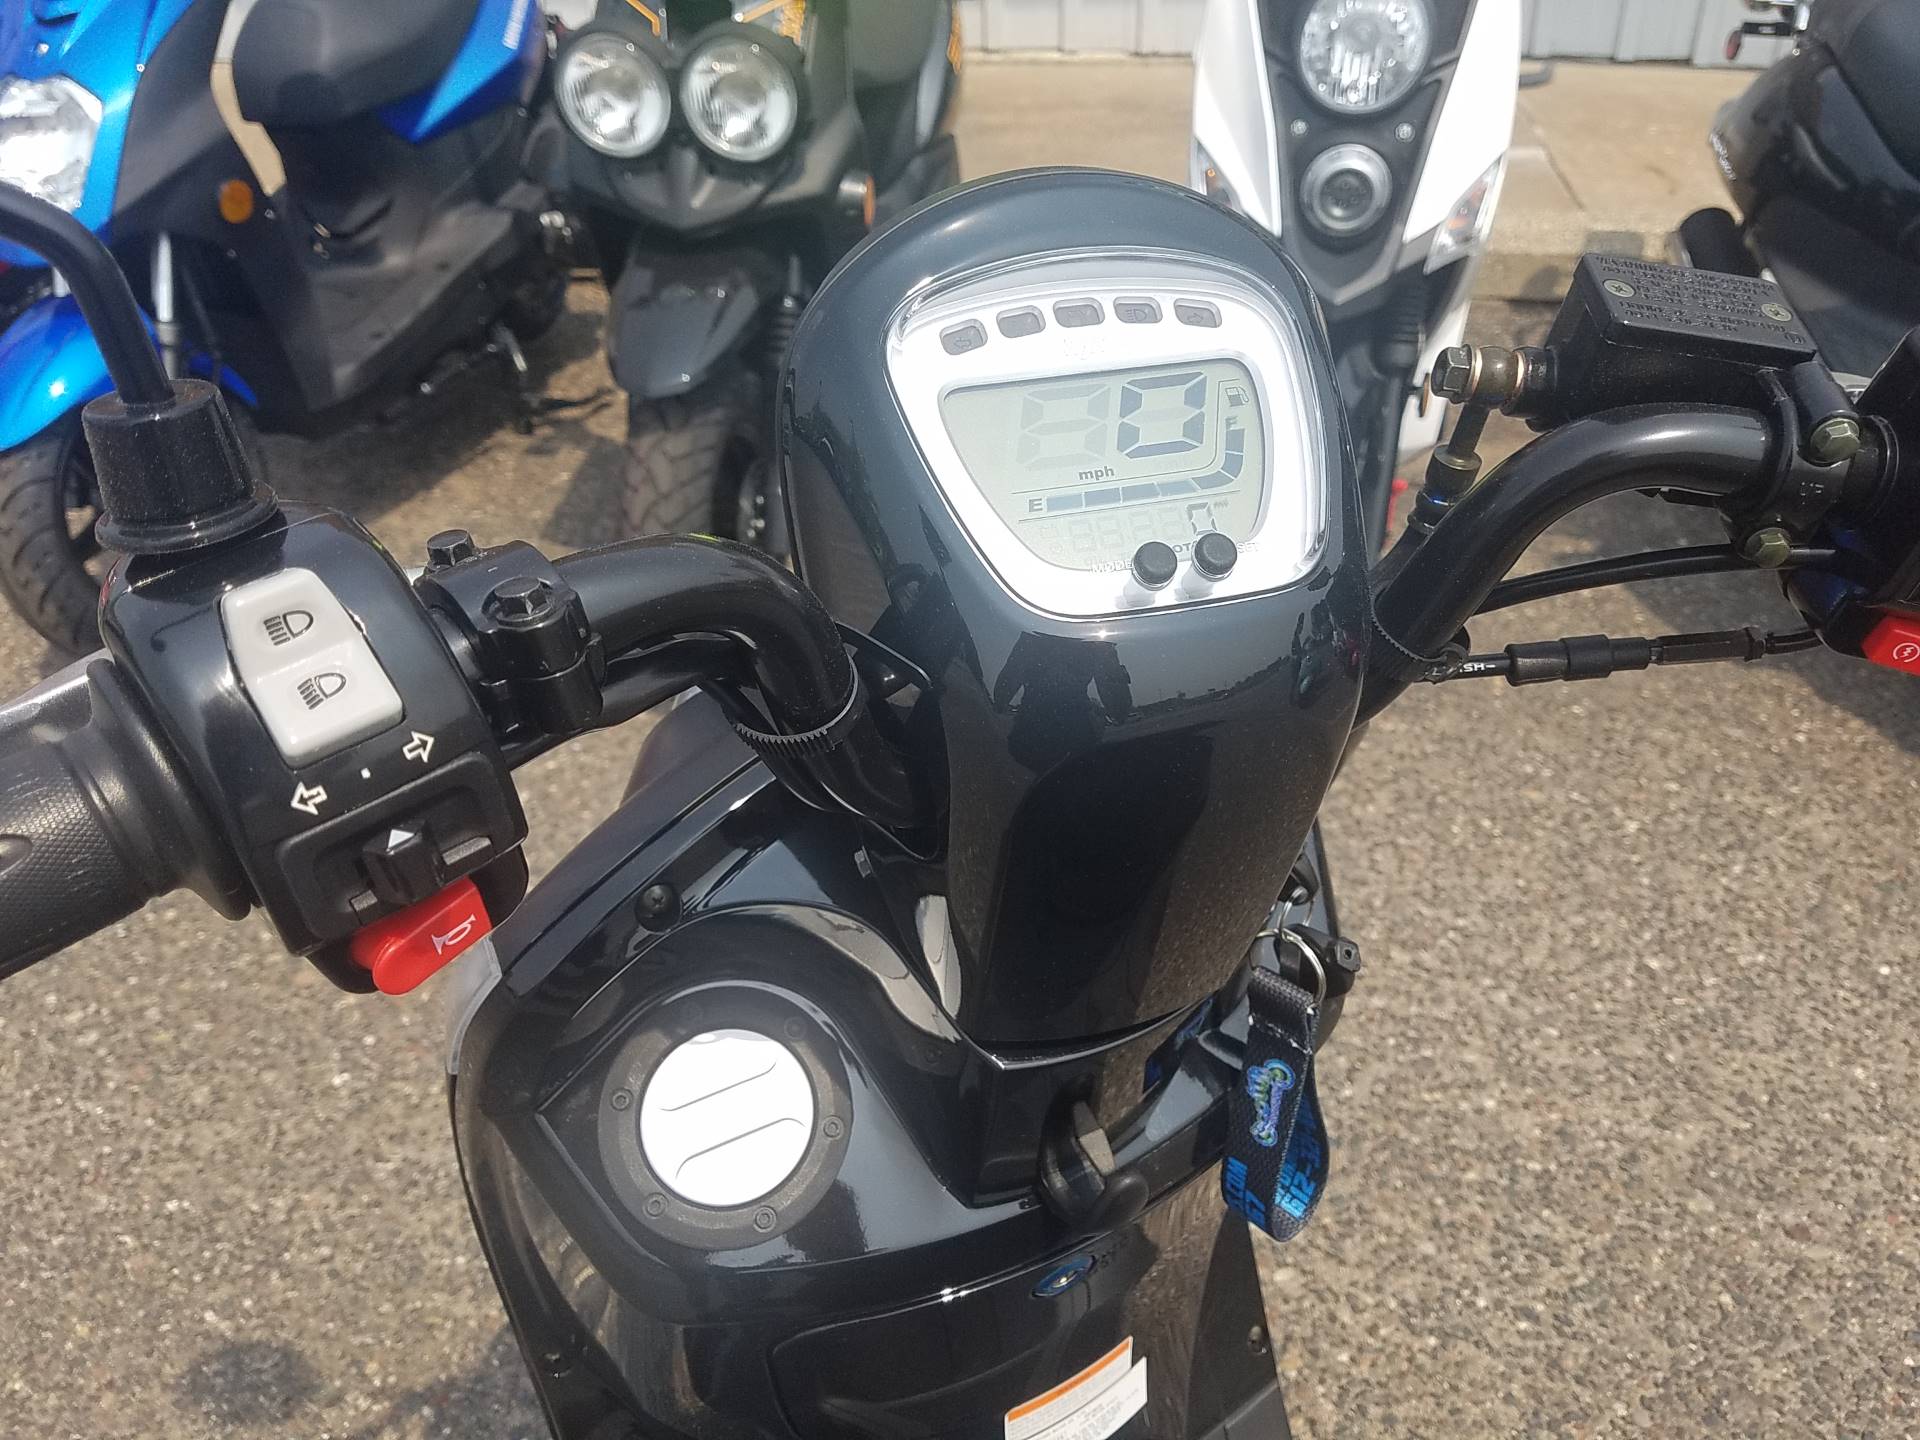 2022 SYM Mio 49cc Scooter in Forest Lake, Minnesota - Photo 9